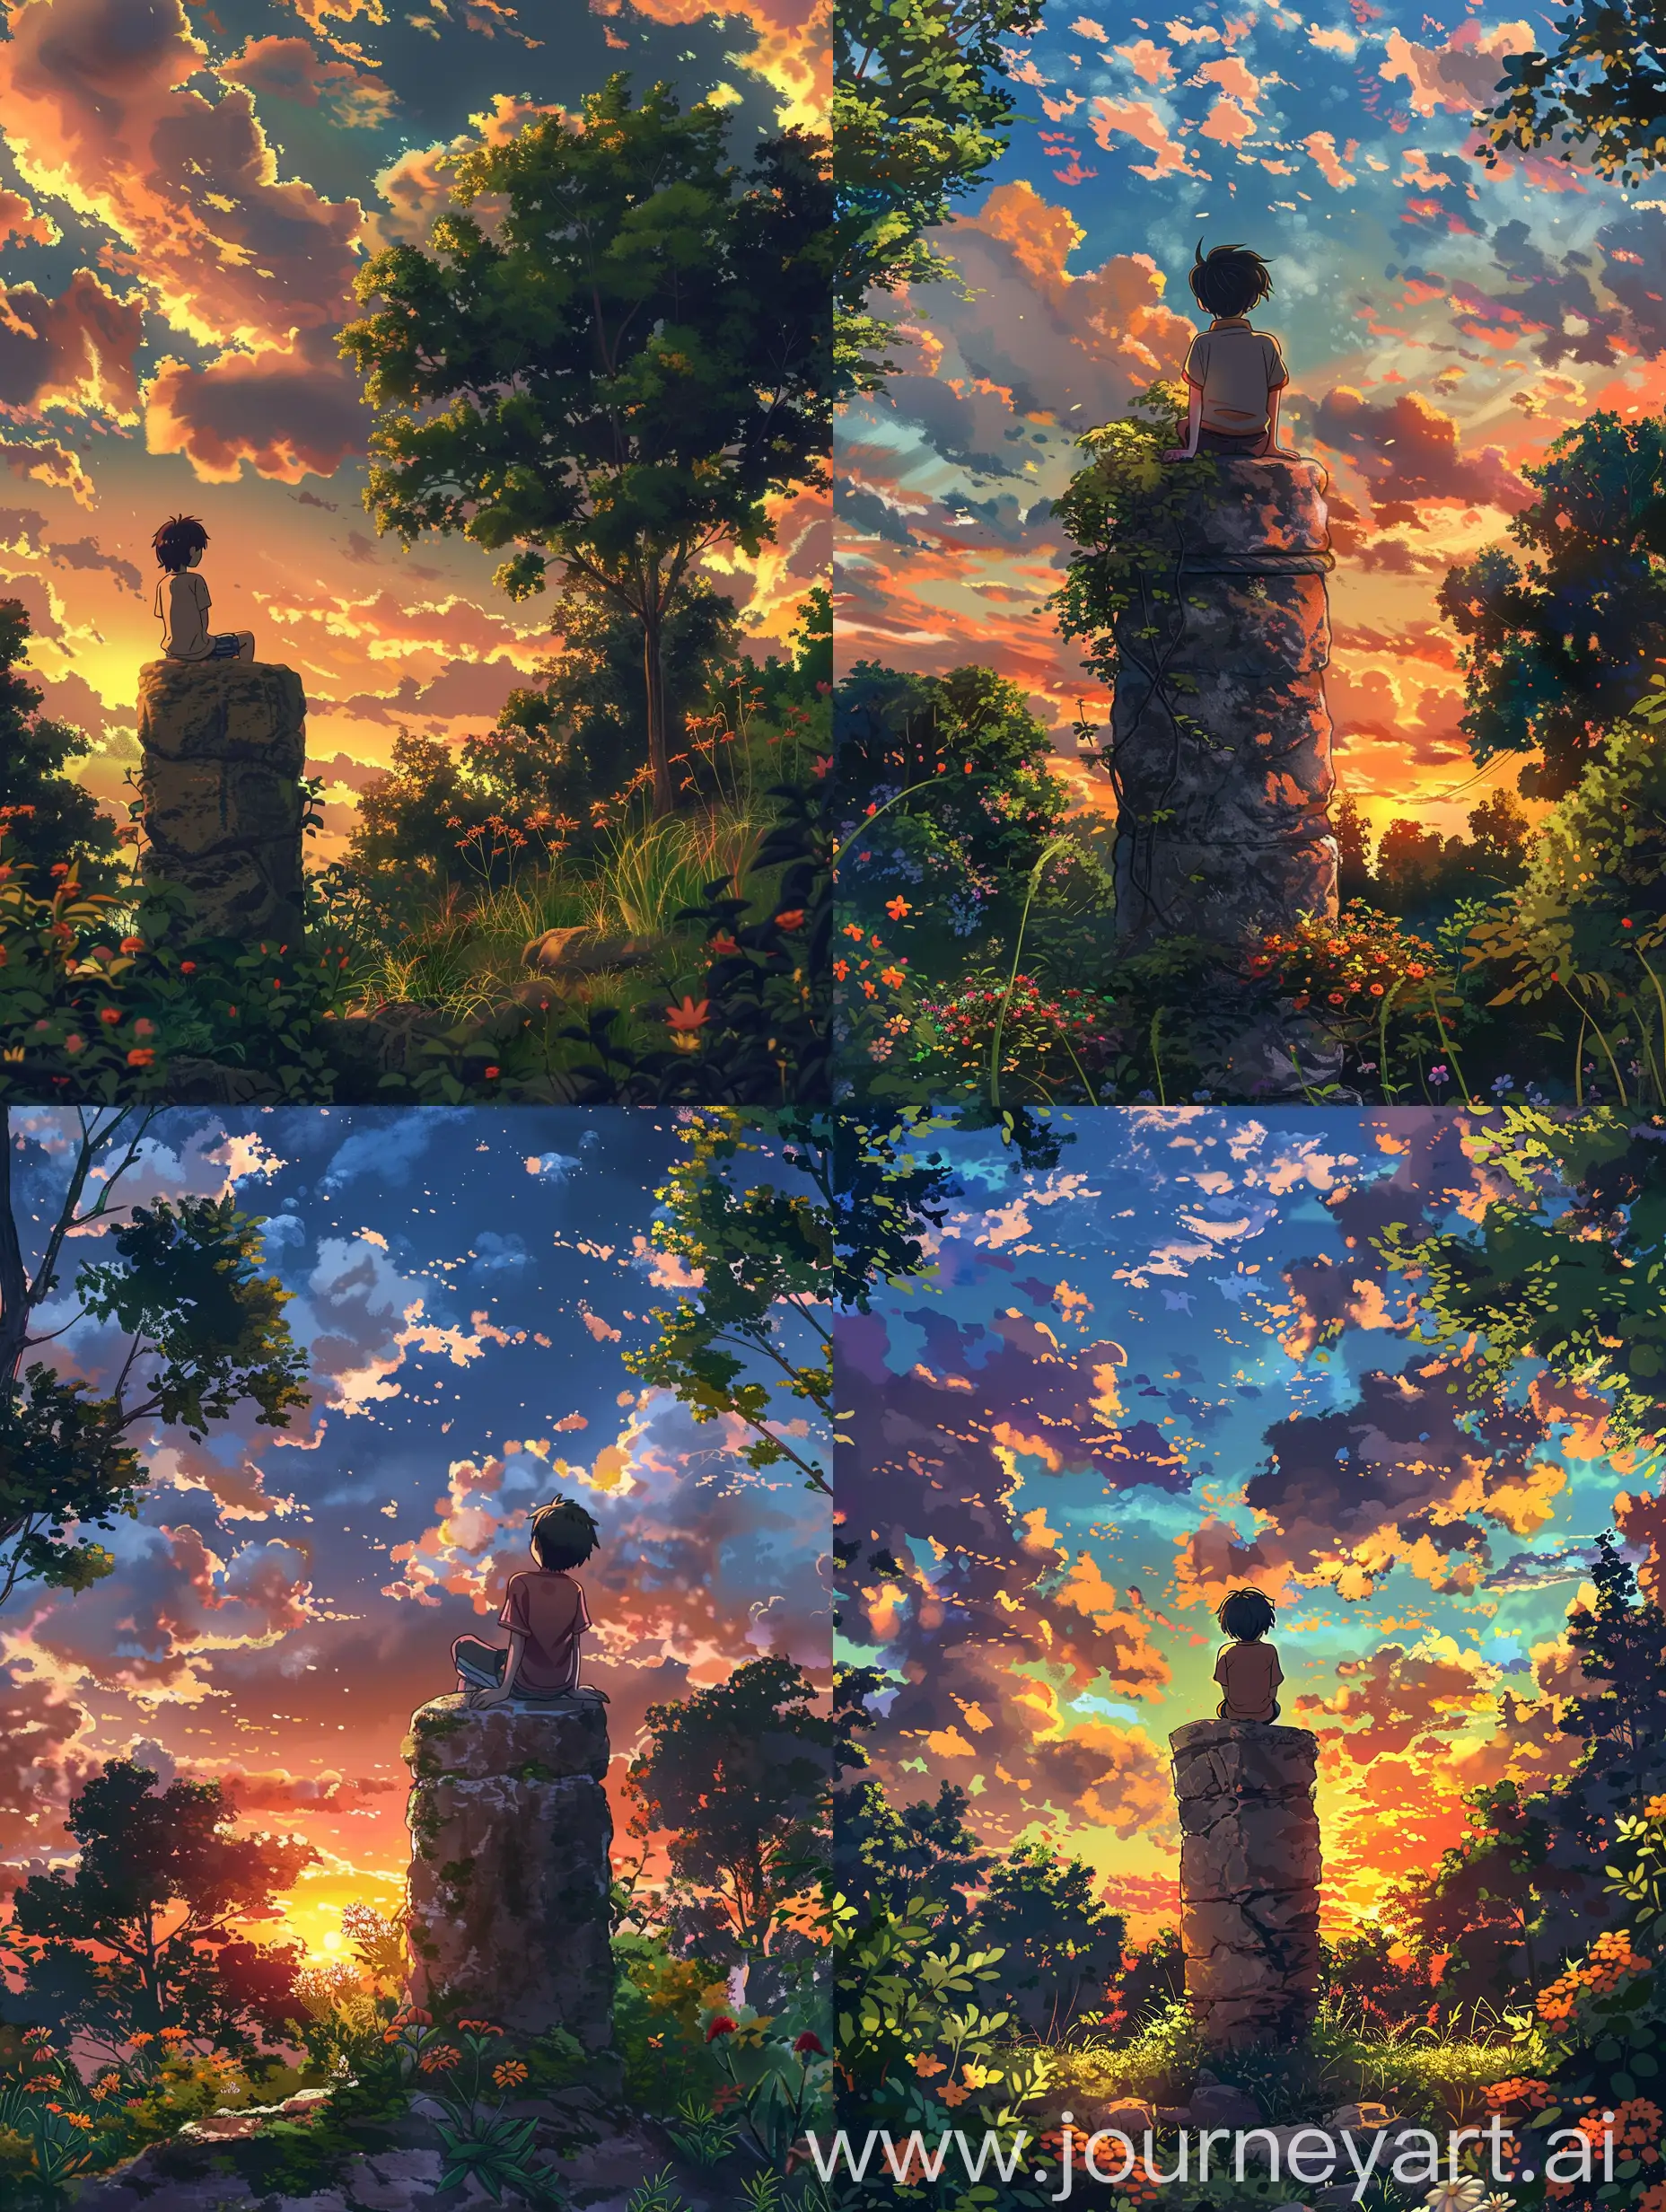 beautiful anime scenery,makato shinkai style,a boy sitting on a rock pillar and viewing sunset,around there are trees,a little bit of grass,some vibrant flowers alongside the pillar,beautiful sky,summers,fluffy clouds,back view,best view,avoid distorted view of the boy,avoid missing fingers.